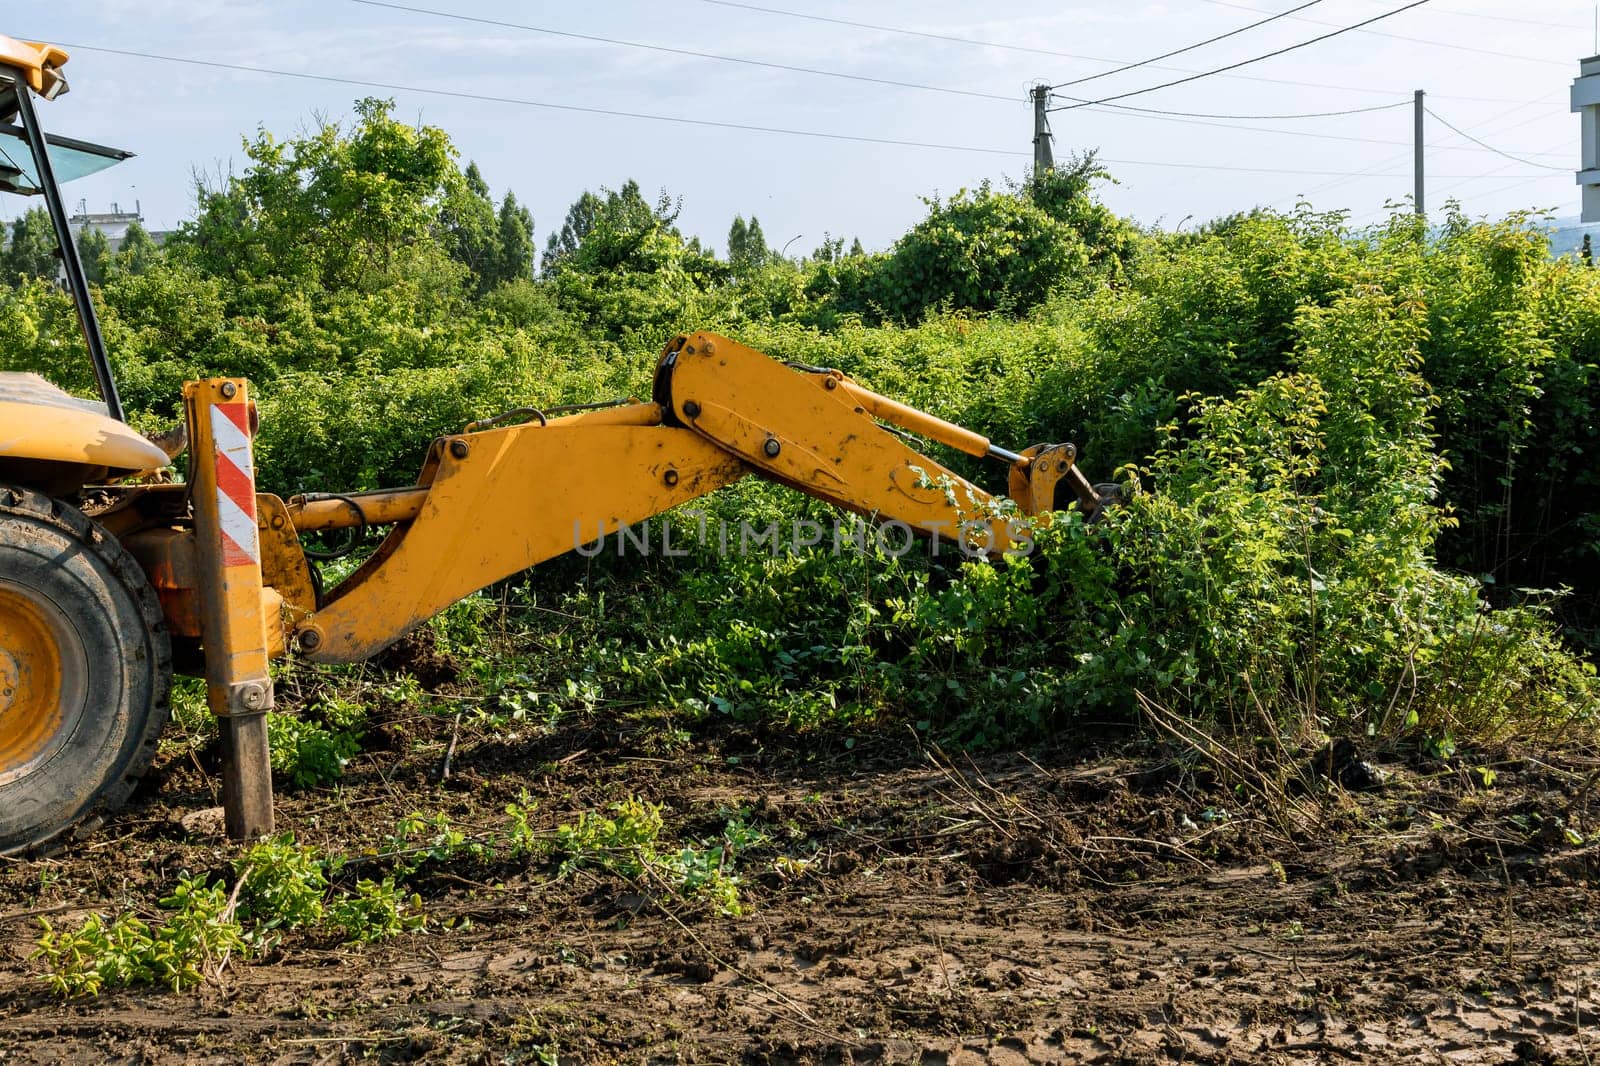 Excavator work efficiently removes bushes and trees, clearing territory for construction. by Yaroslav